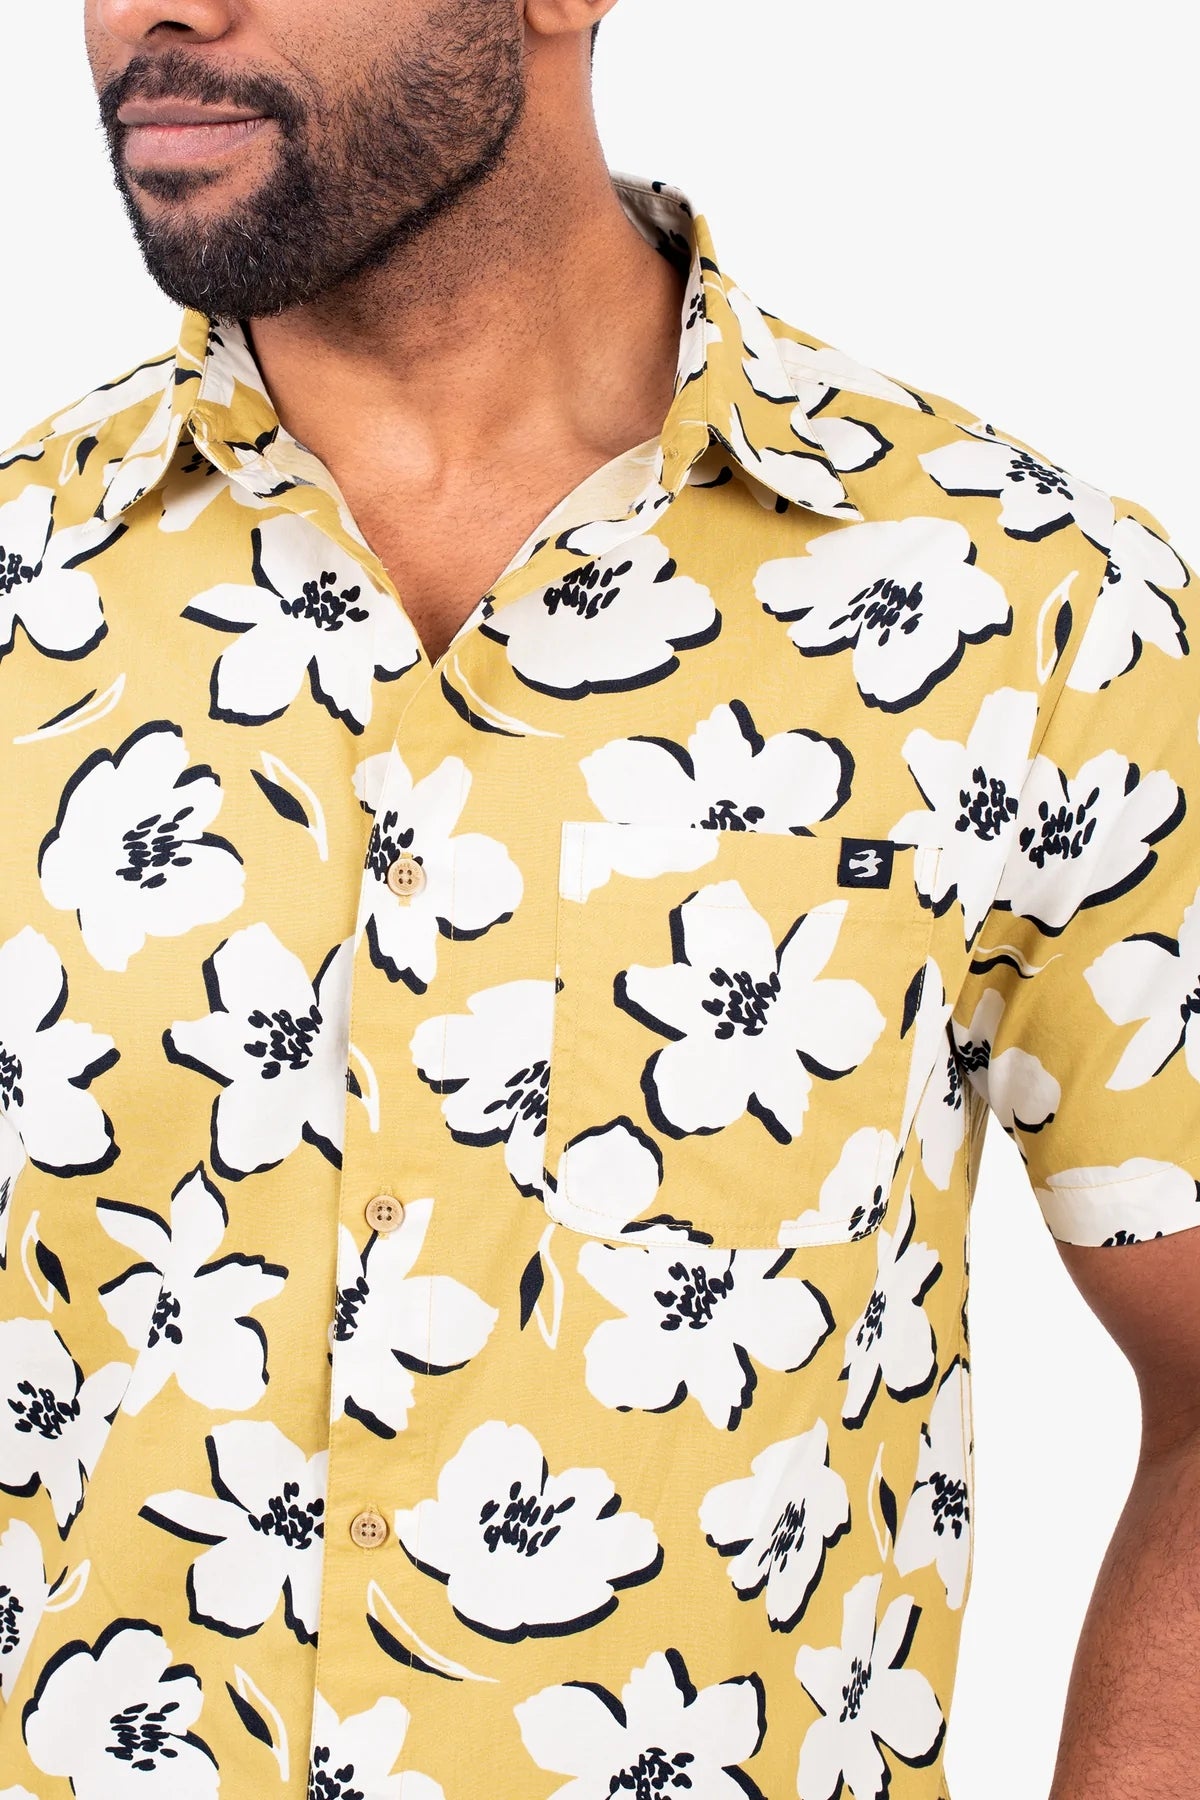 A yellow and white floral print men's shirt from Brakeburn